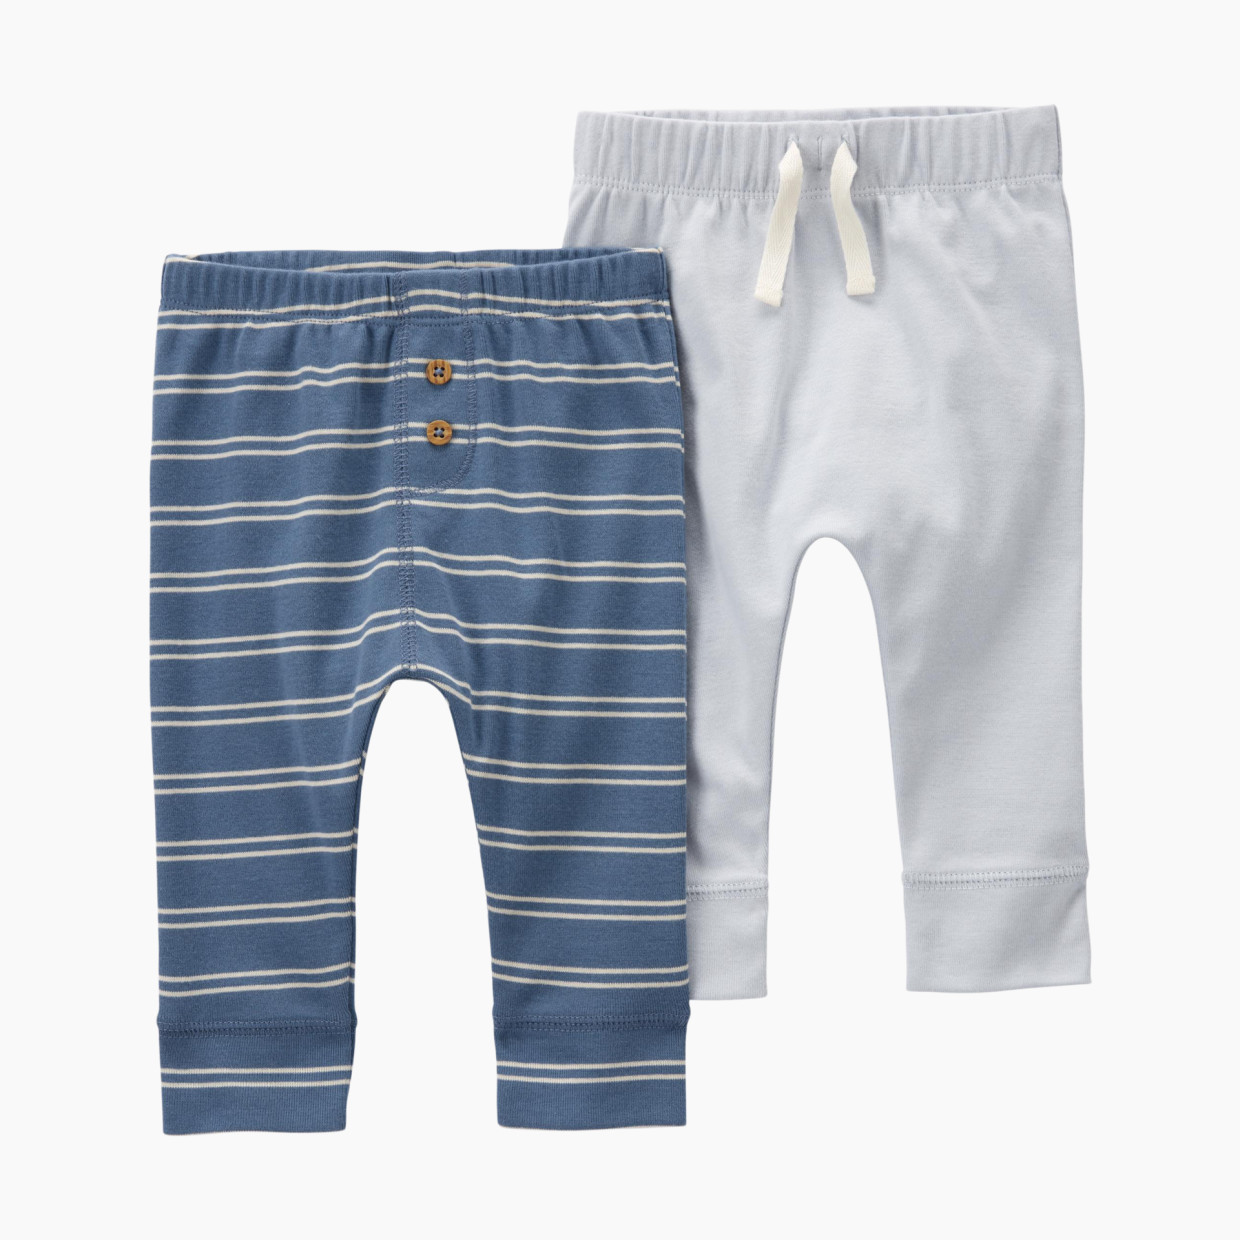 Carter's 2-Pack Pull-On Pants - Blue/Gray, 6 M.